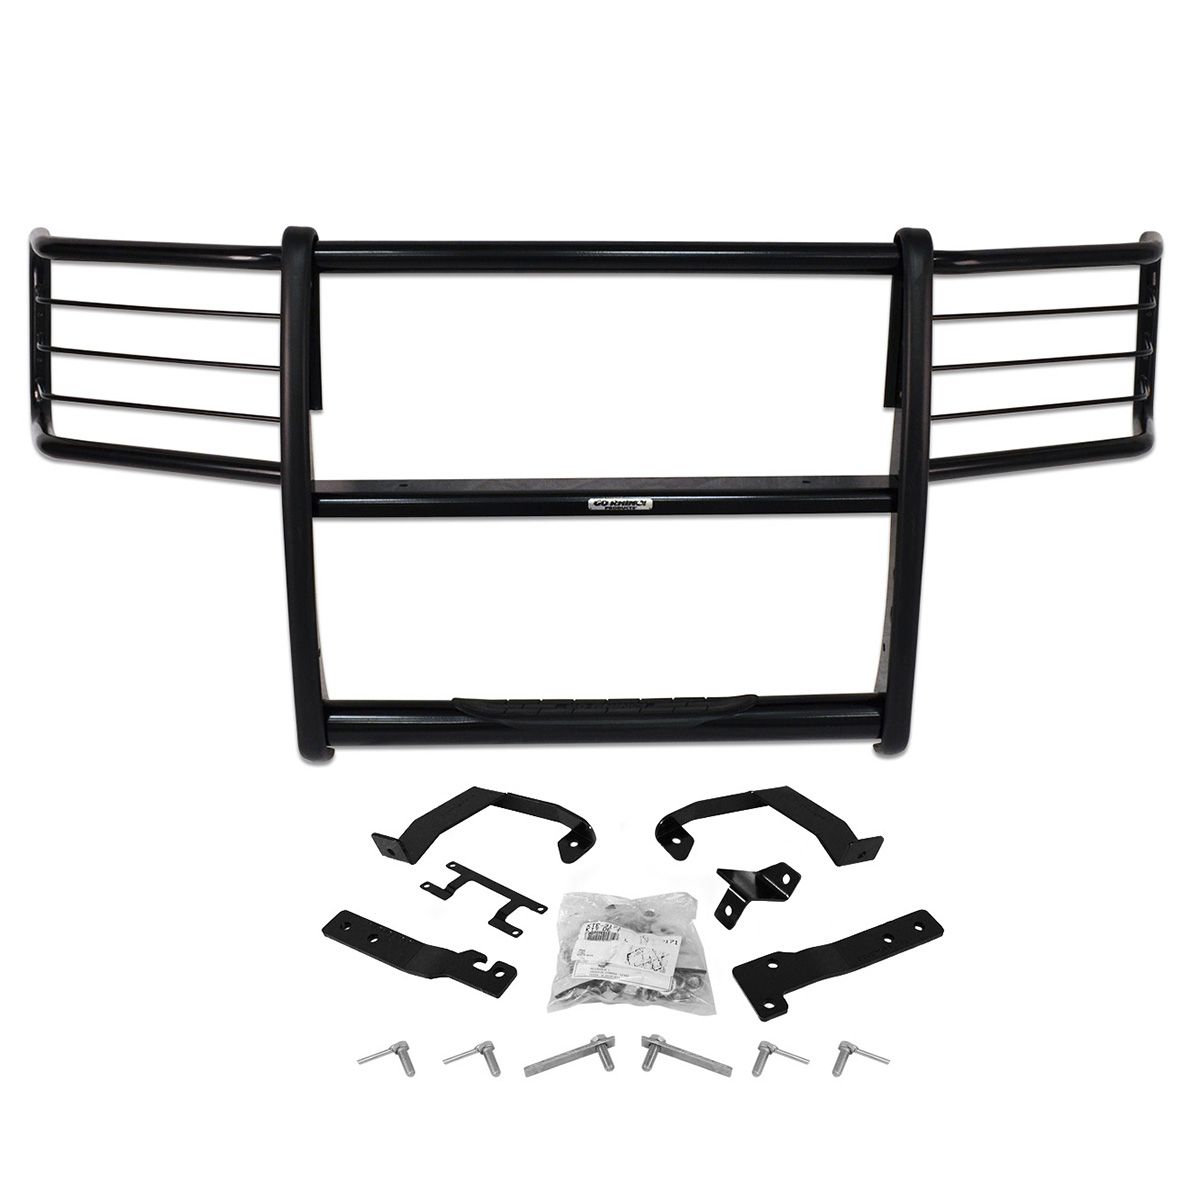 Go Rhino 3369MB - 3000 Series StepGuard Grille Guard with Brush Guards - Black powder coat